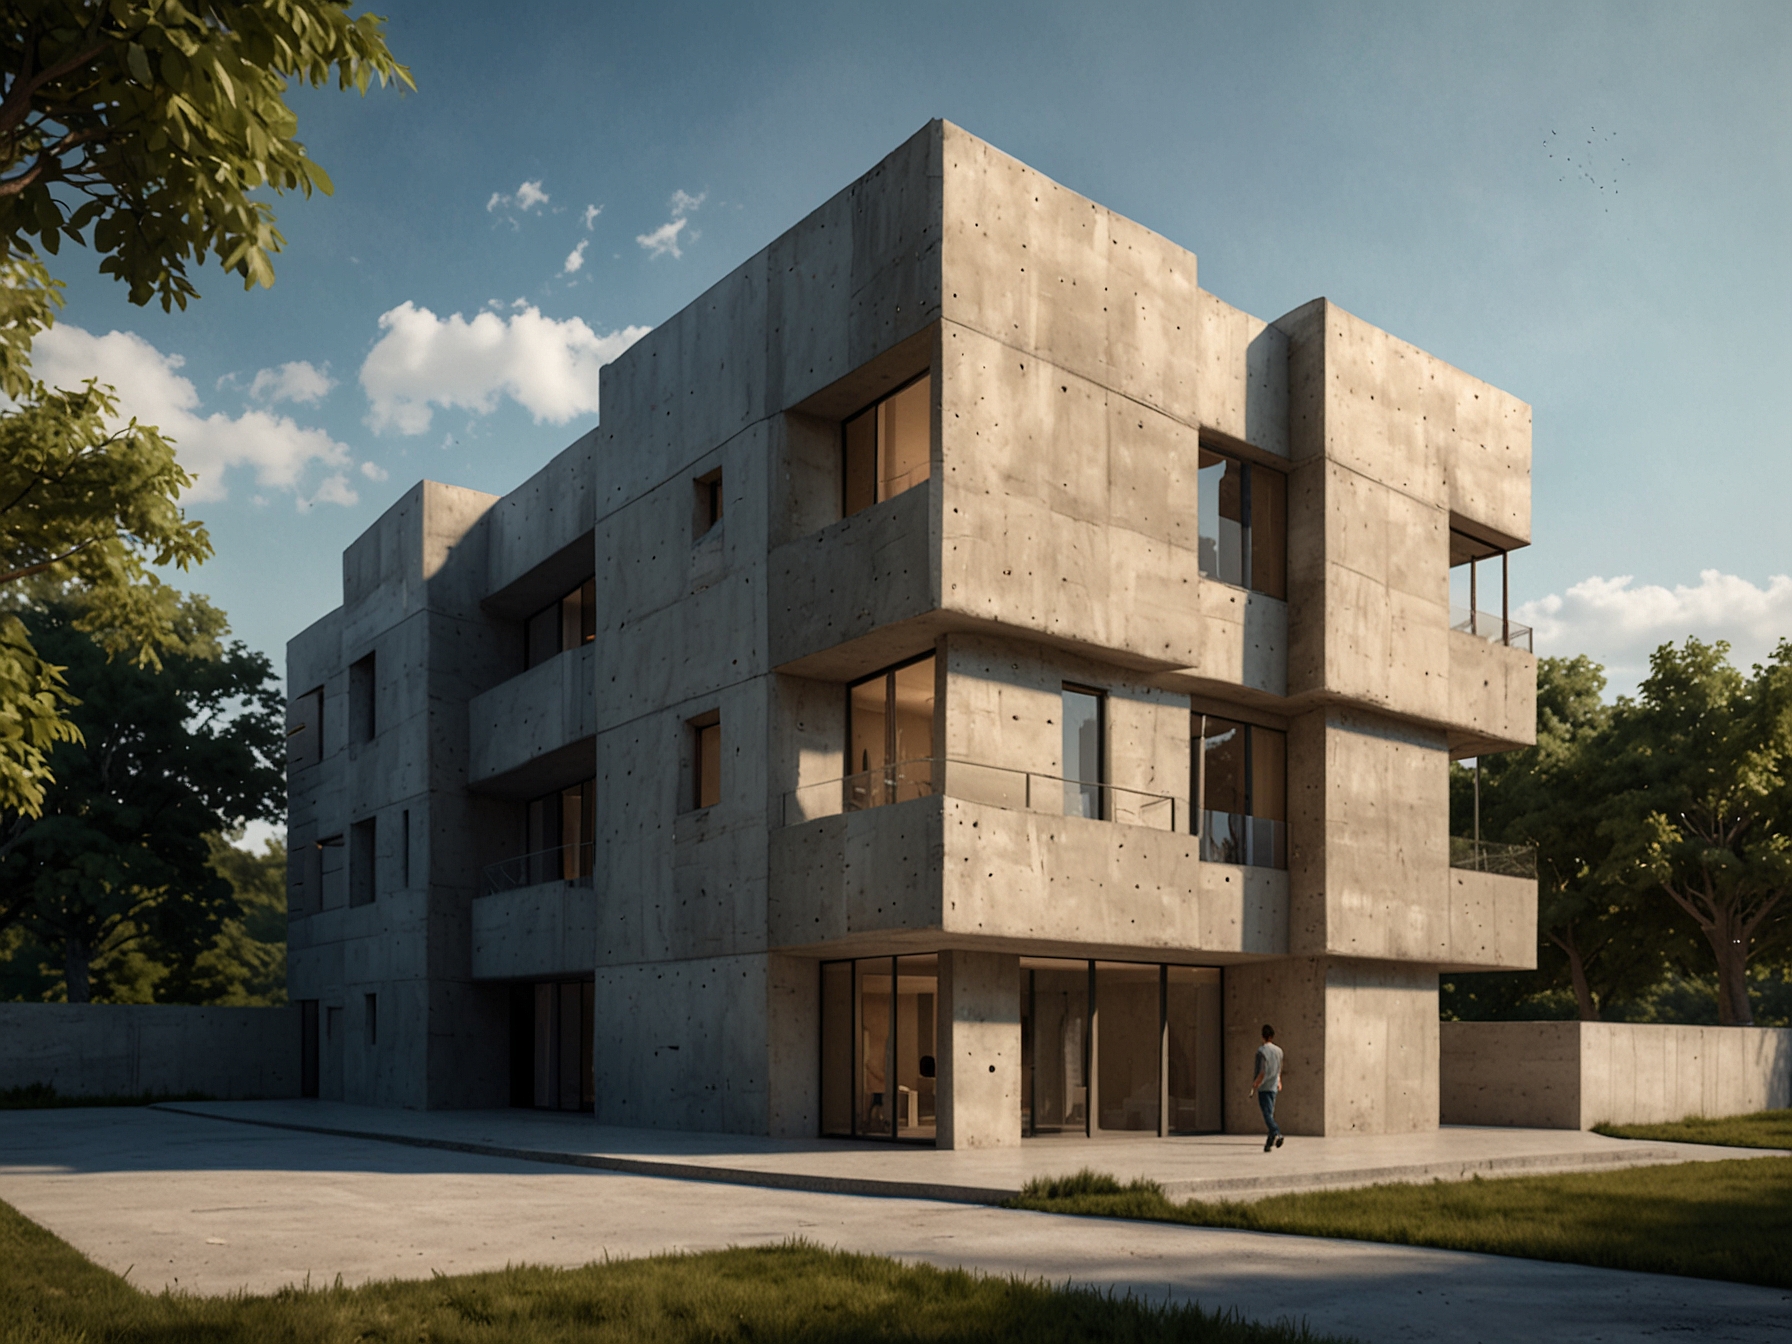 A completed building constructed with carbonated concrete, illustrating the durability and environmental benefits of this new method while maintaining the structural integrity of traditional concrete.